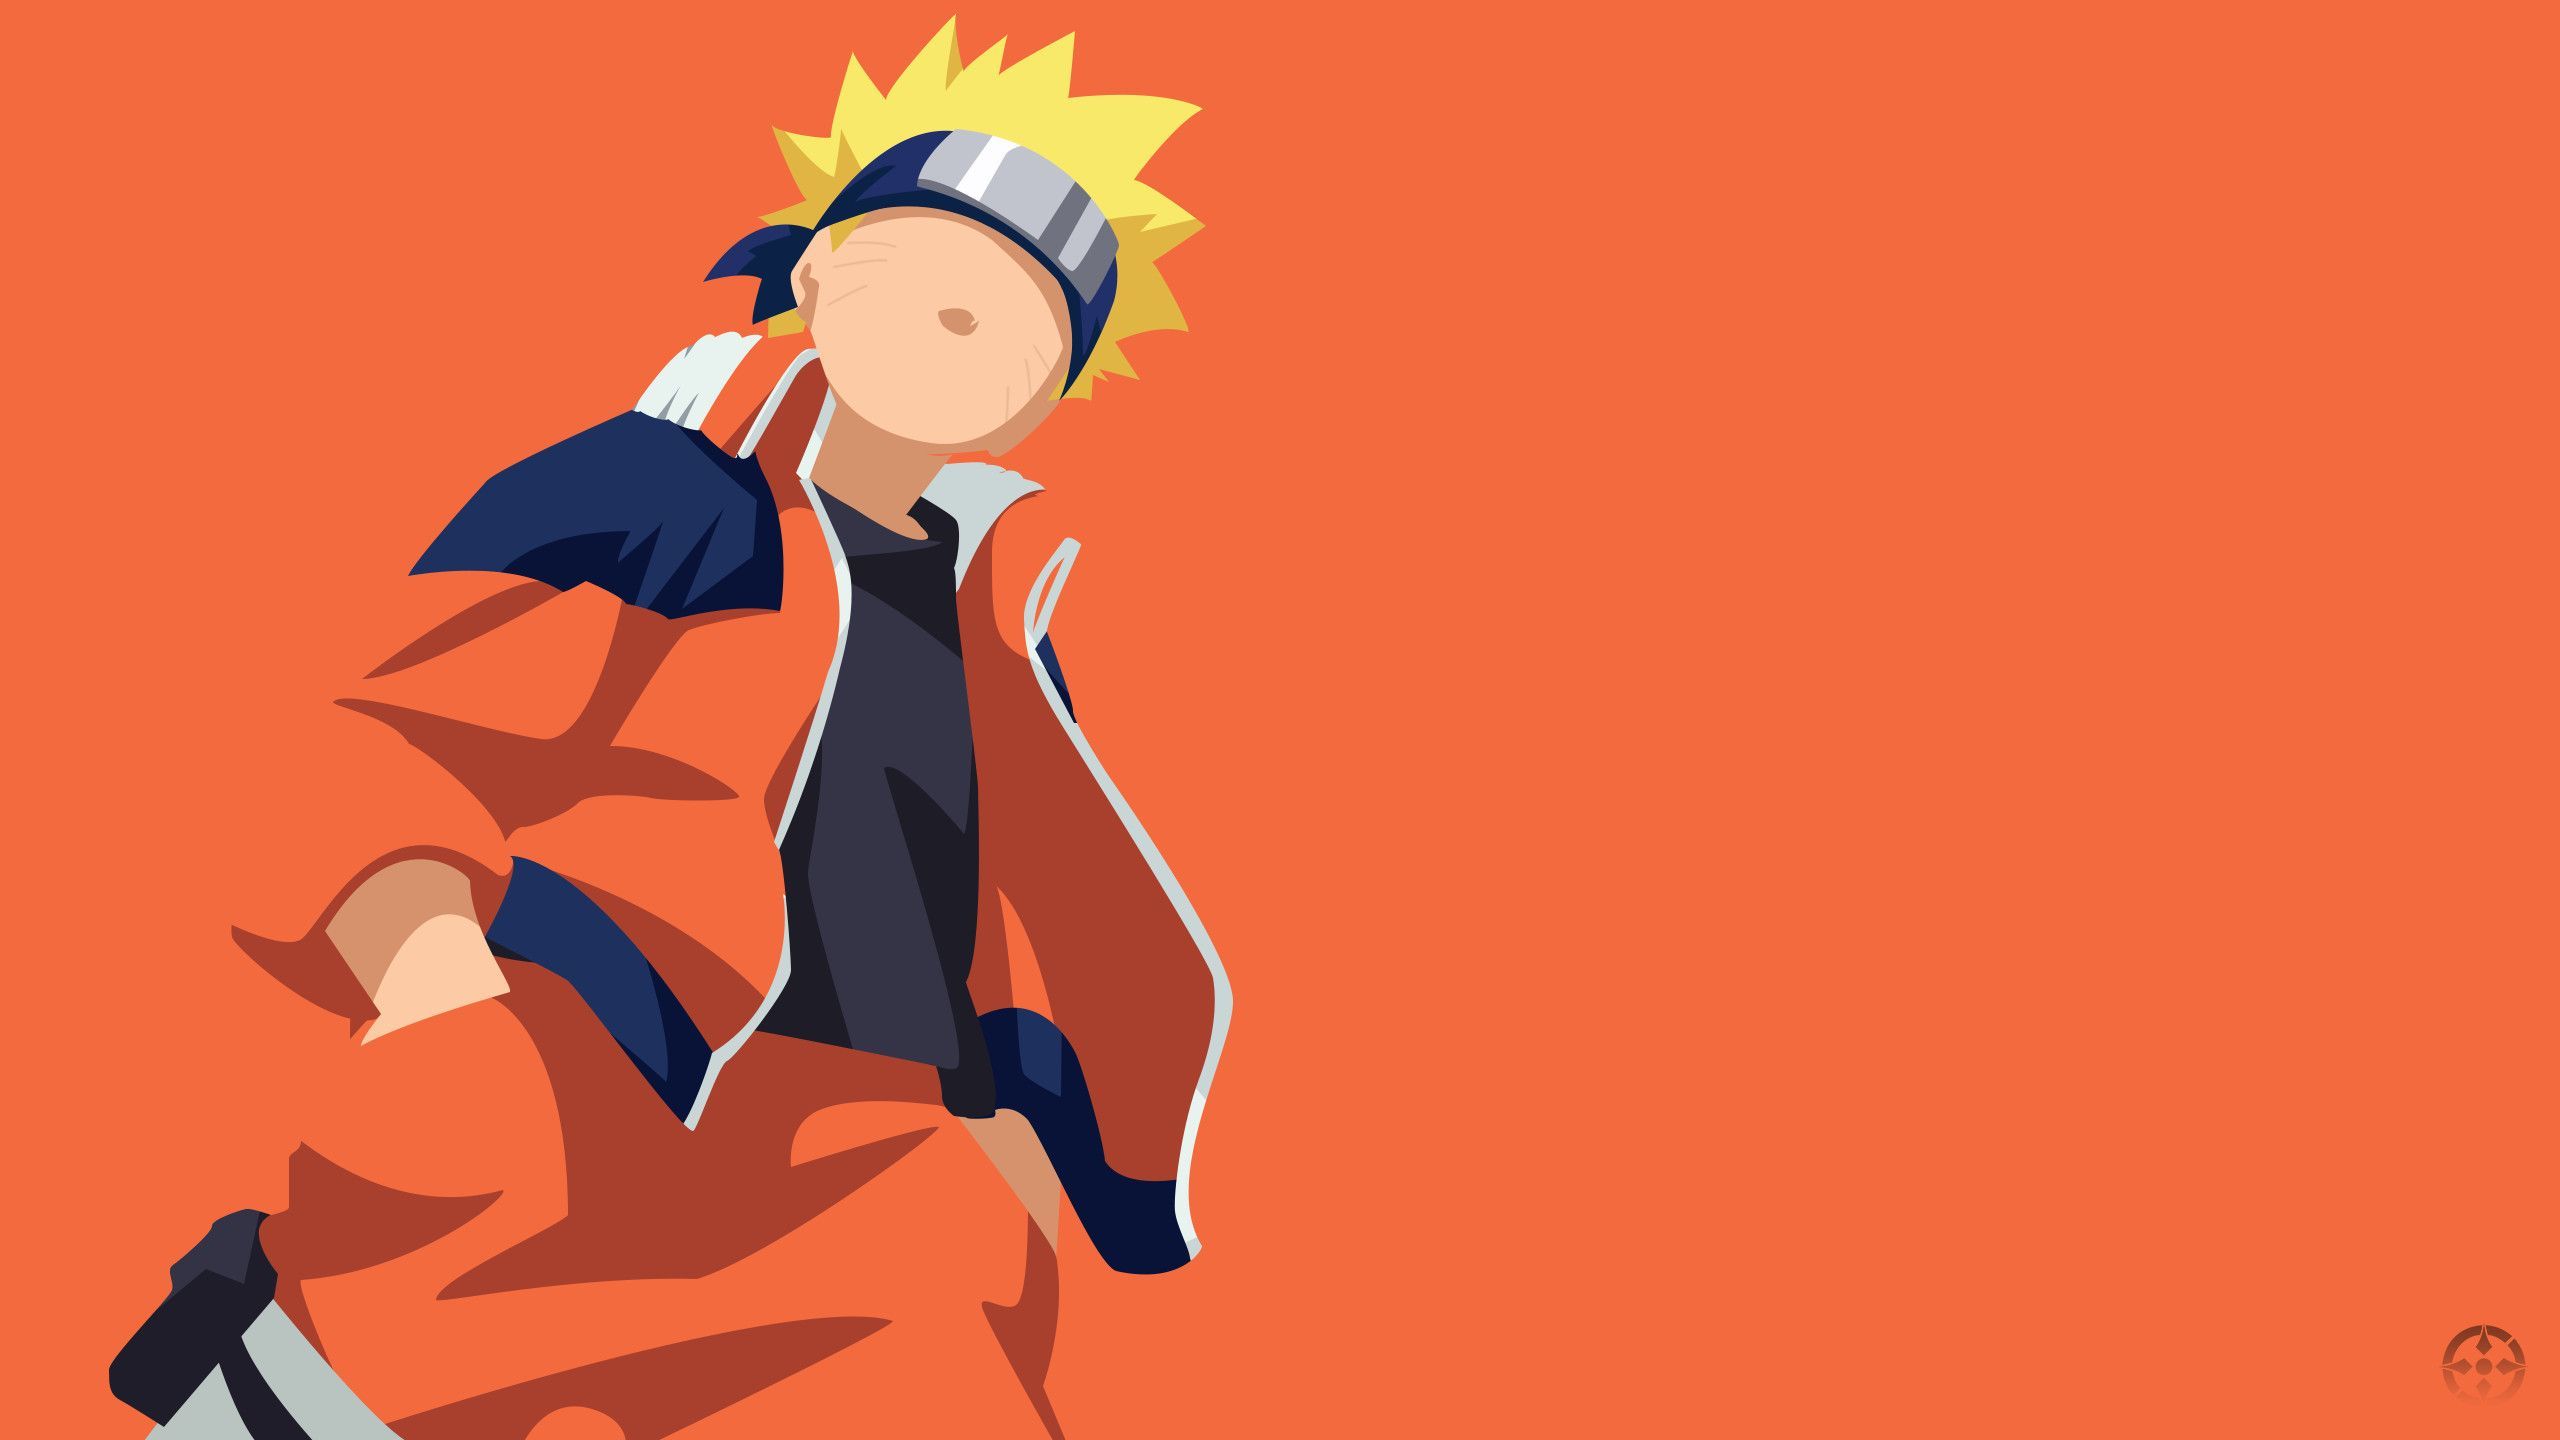 Naruto For Pc Wallpapers